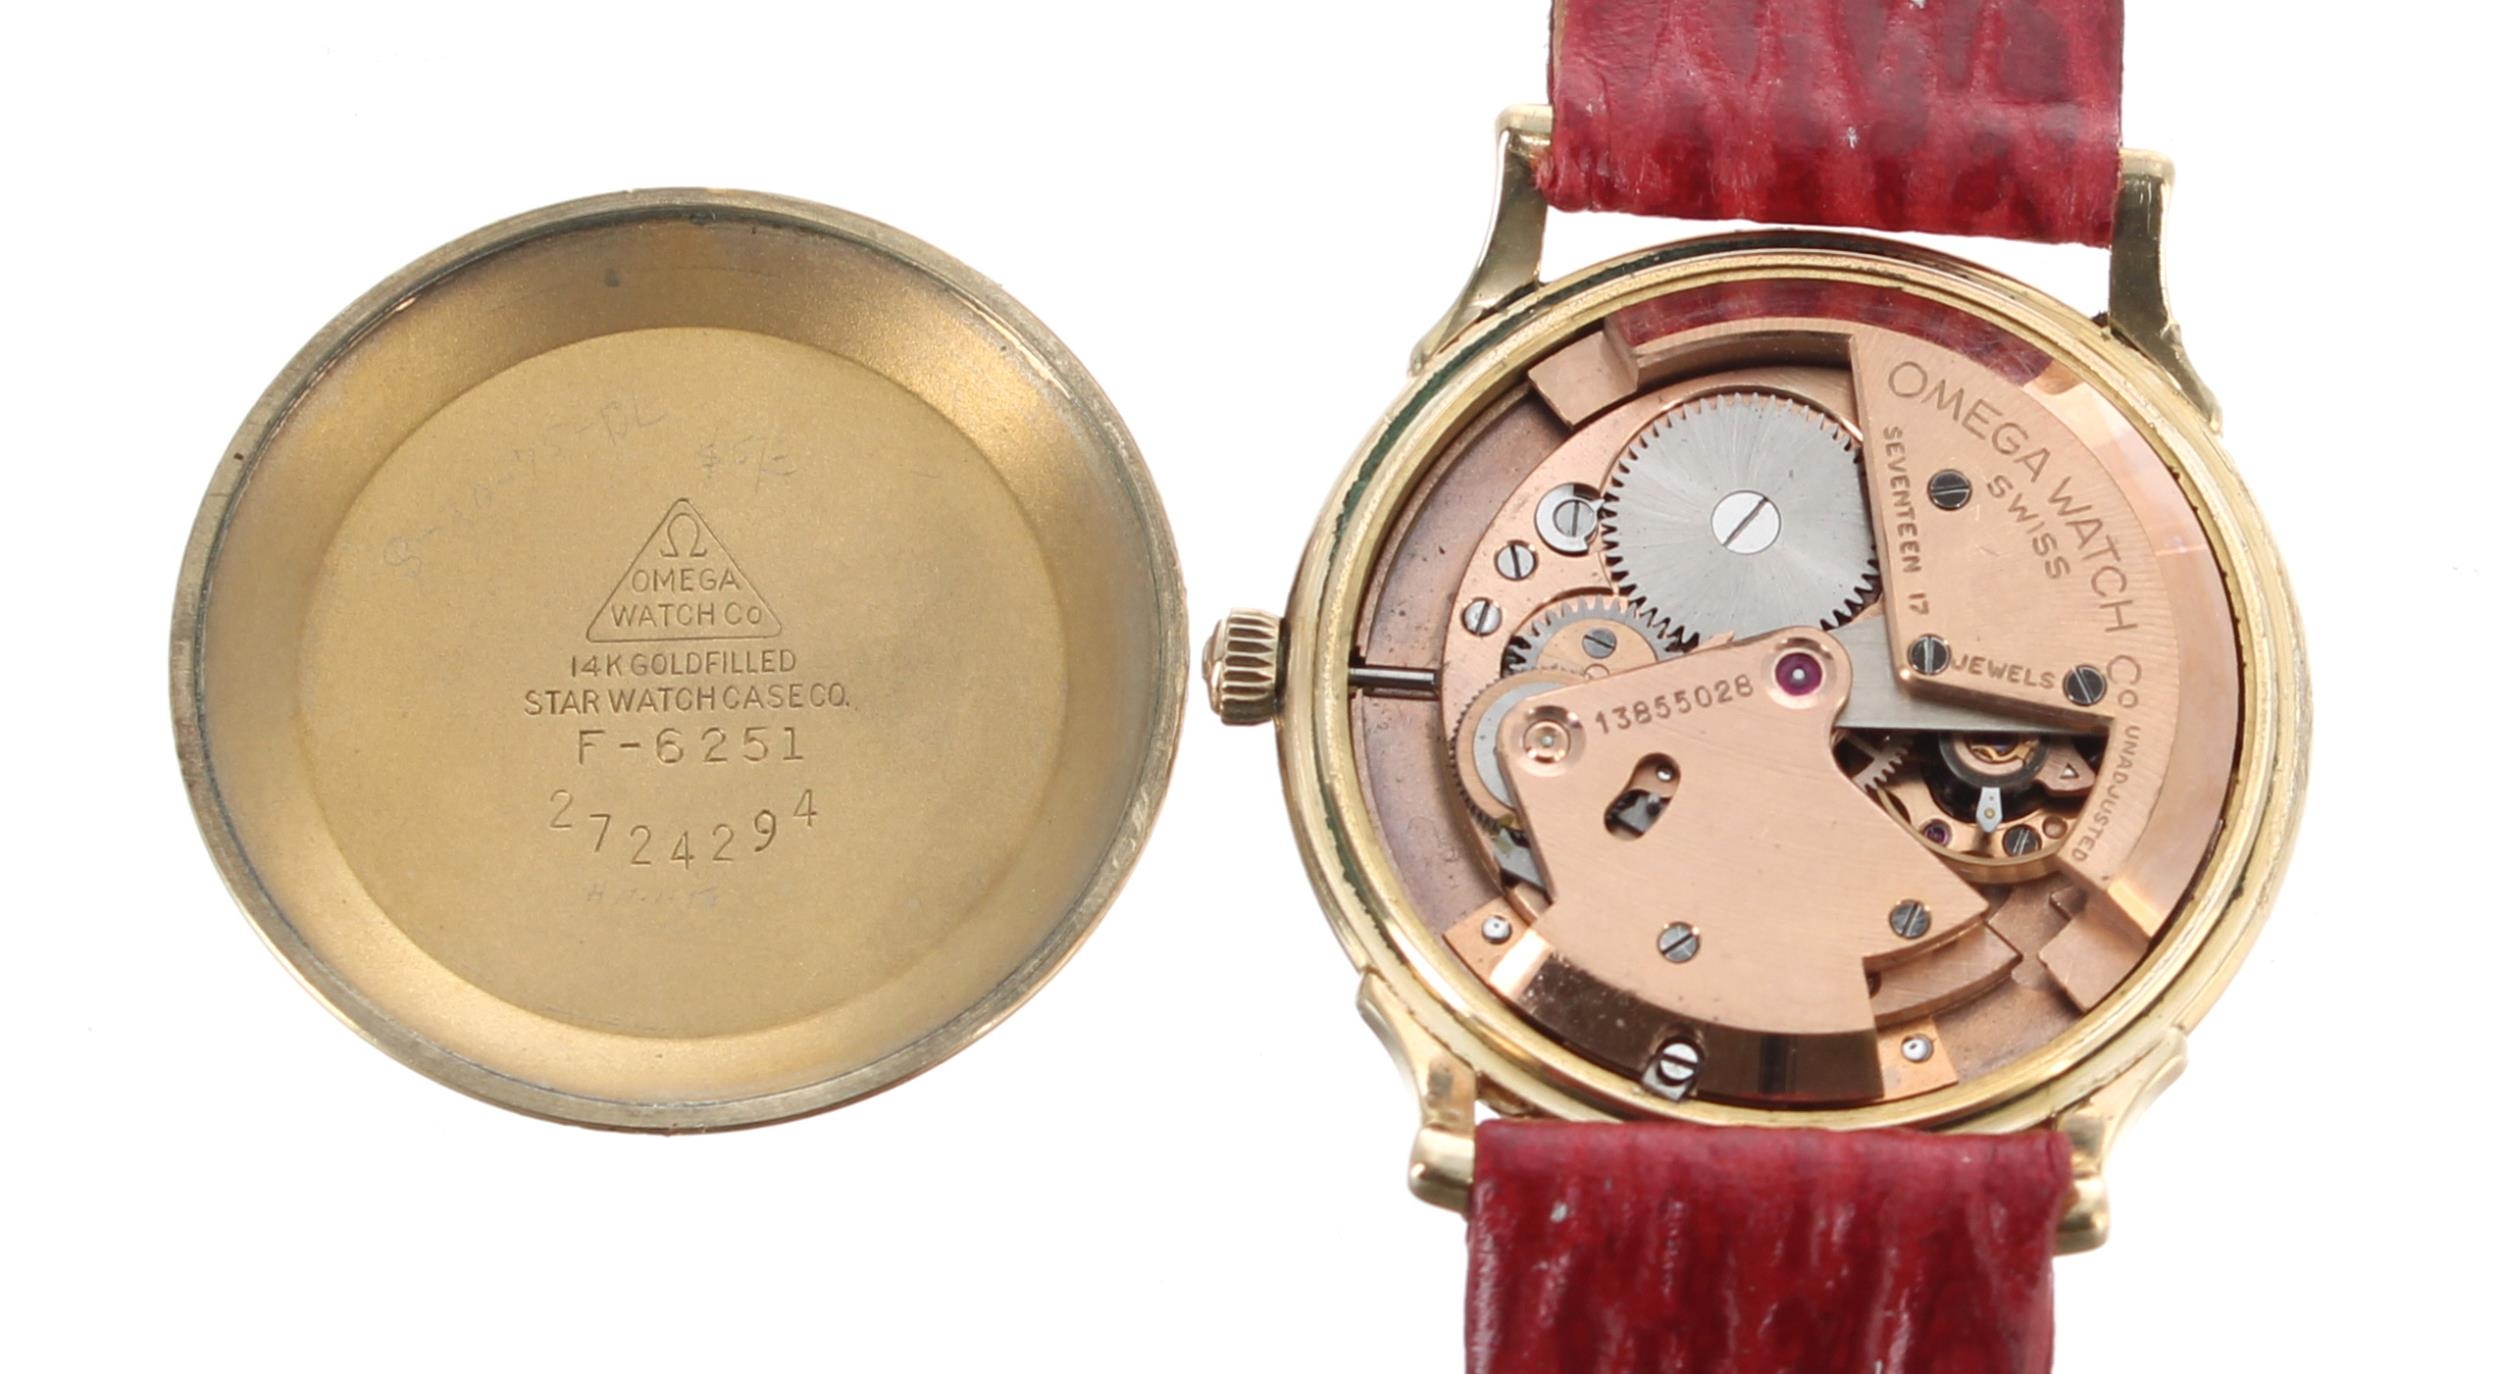 Omega 14k gold filled automatic 'bumper' gentleman's wristwatch, ref. F-6251, serial no. 13855xxx, - Image 3 of 3